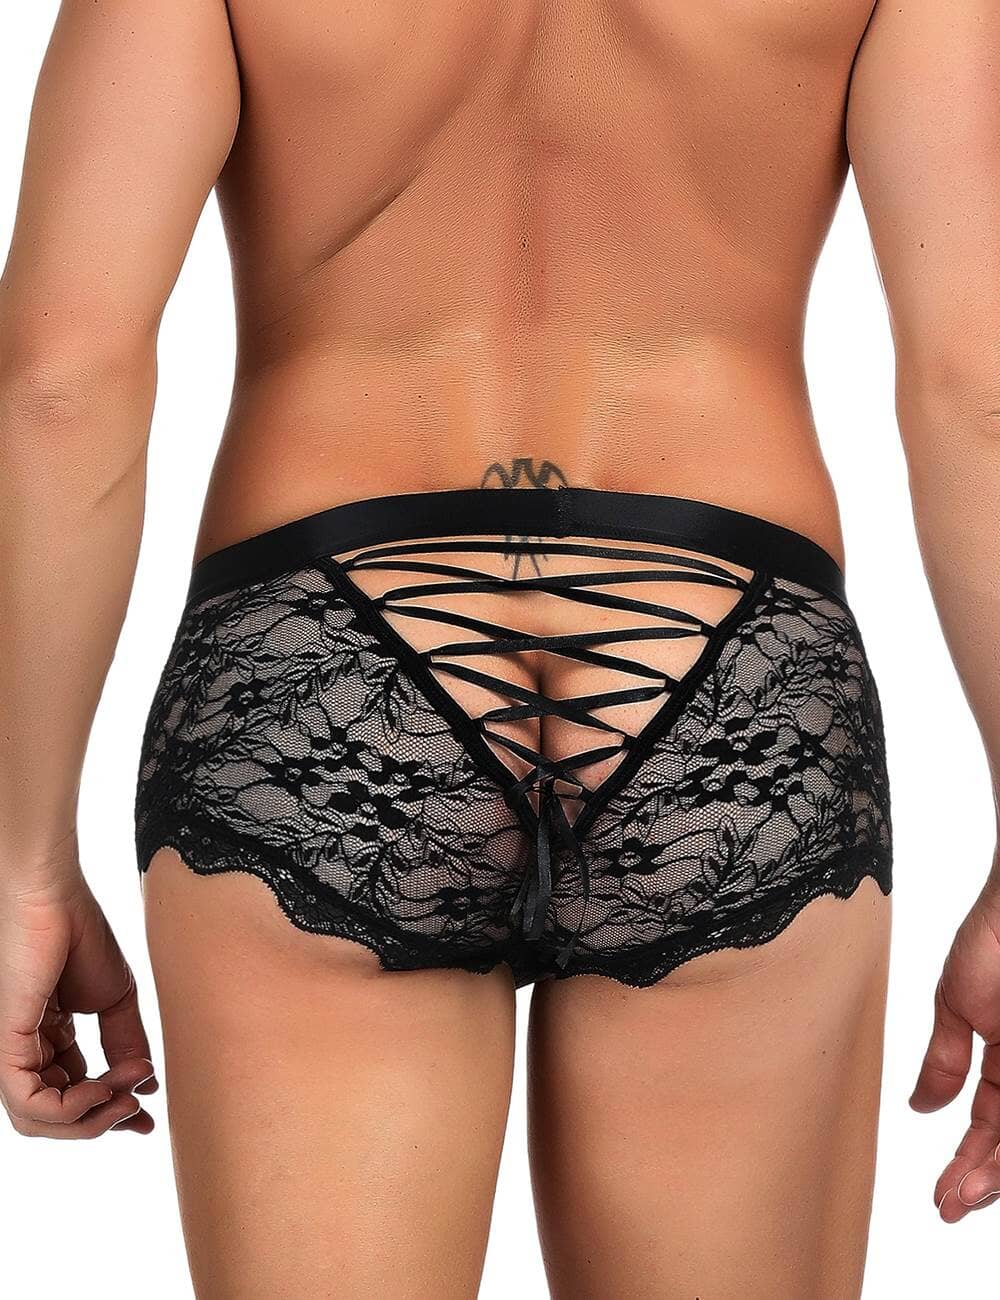 a man wearing a black underwear with lace